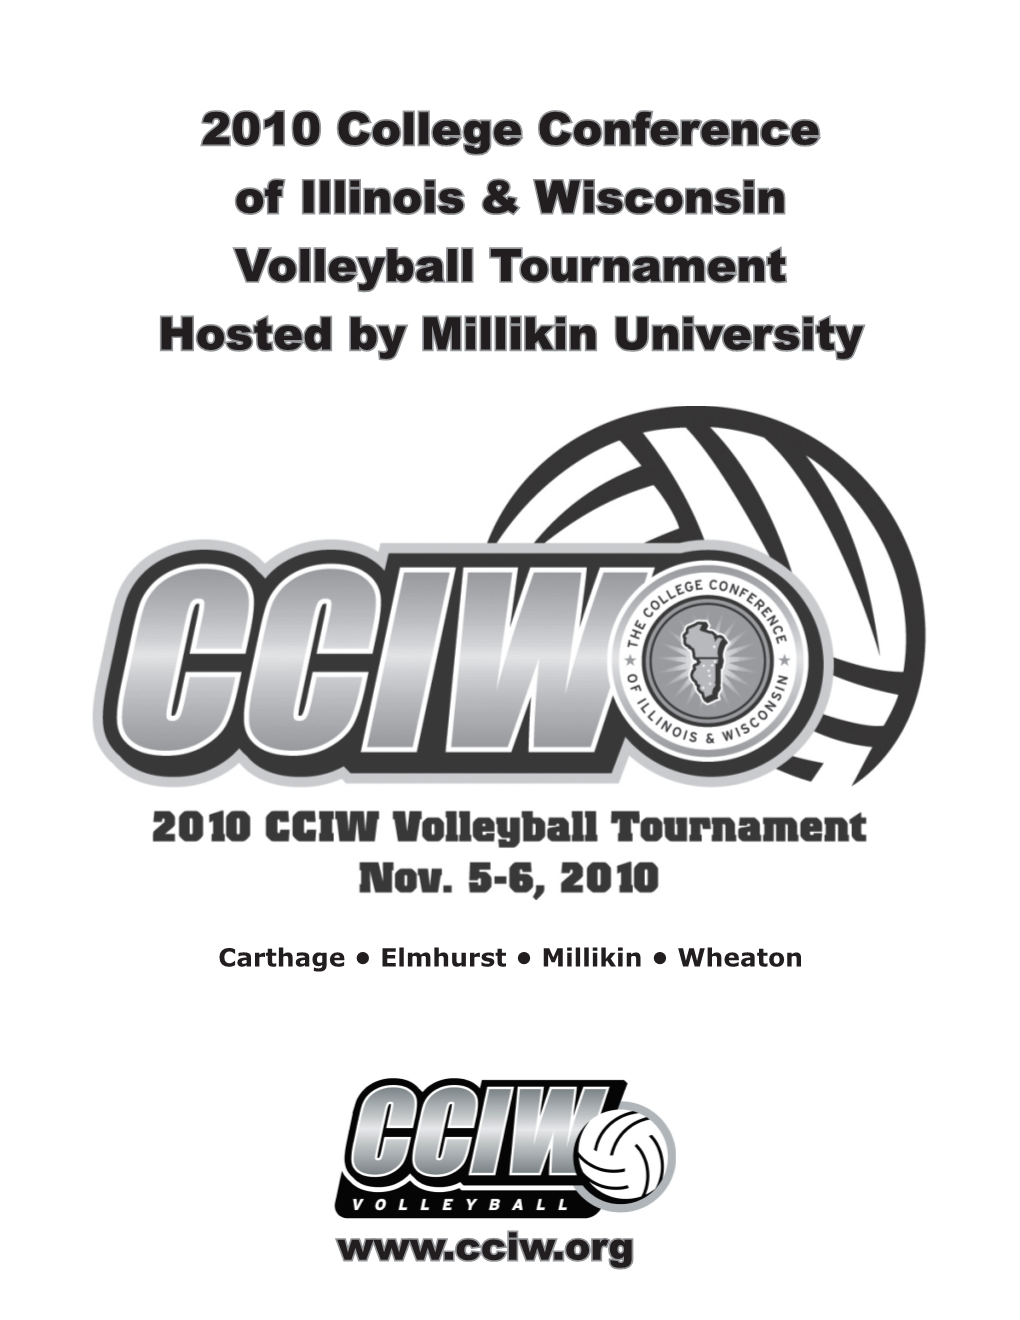 2010 College Conference of Illinois & Wisconsin Volleyball Tournament